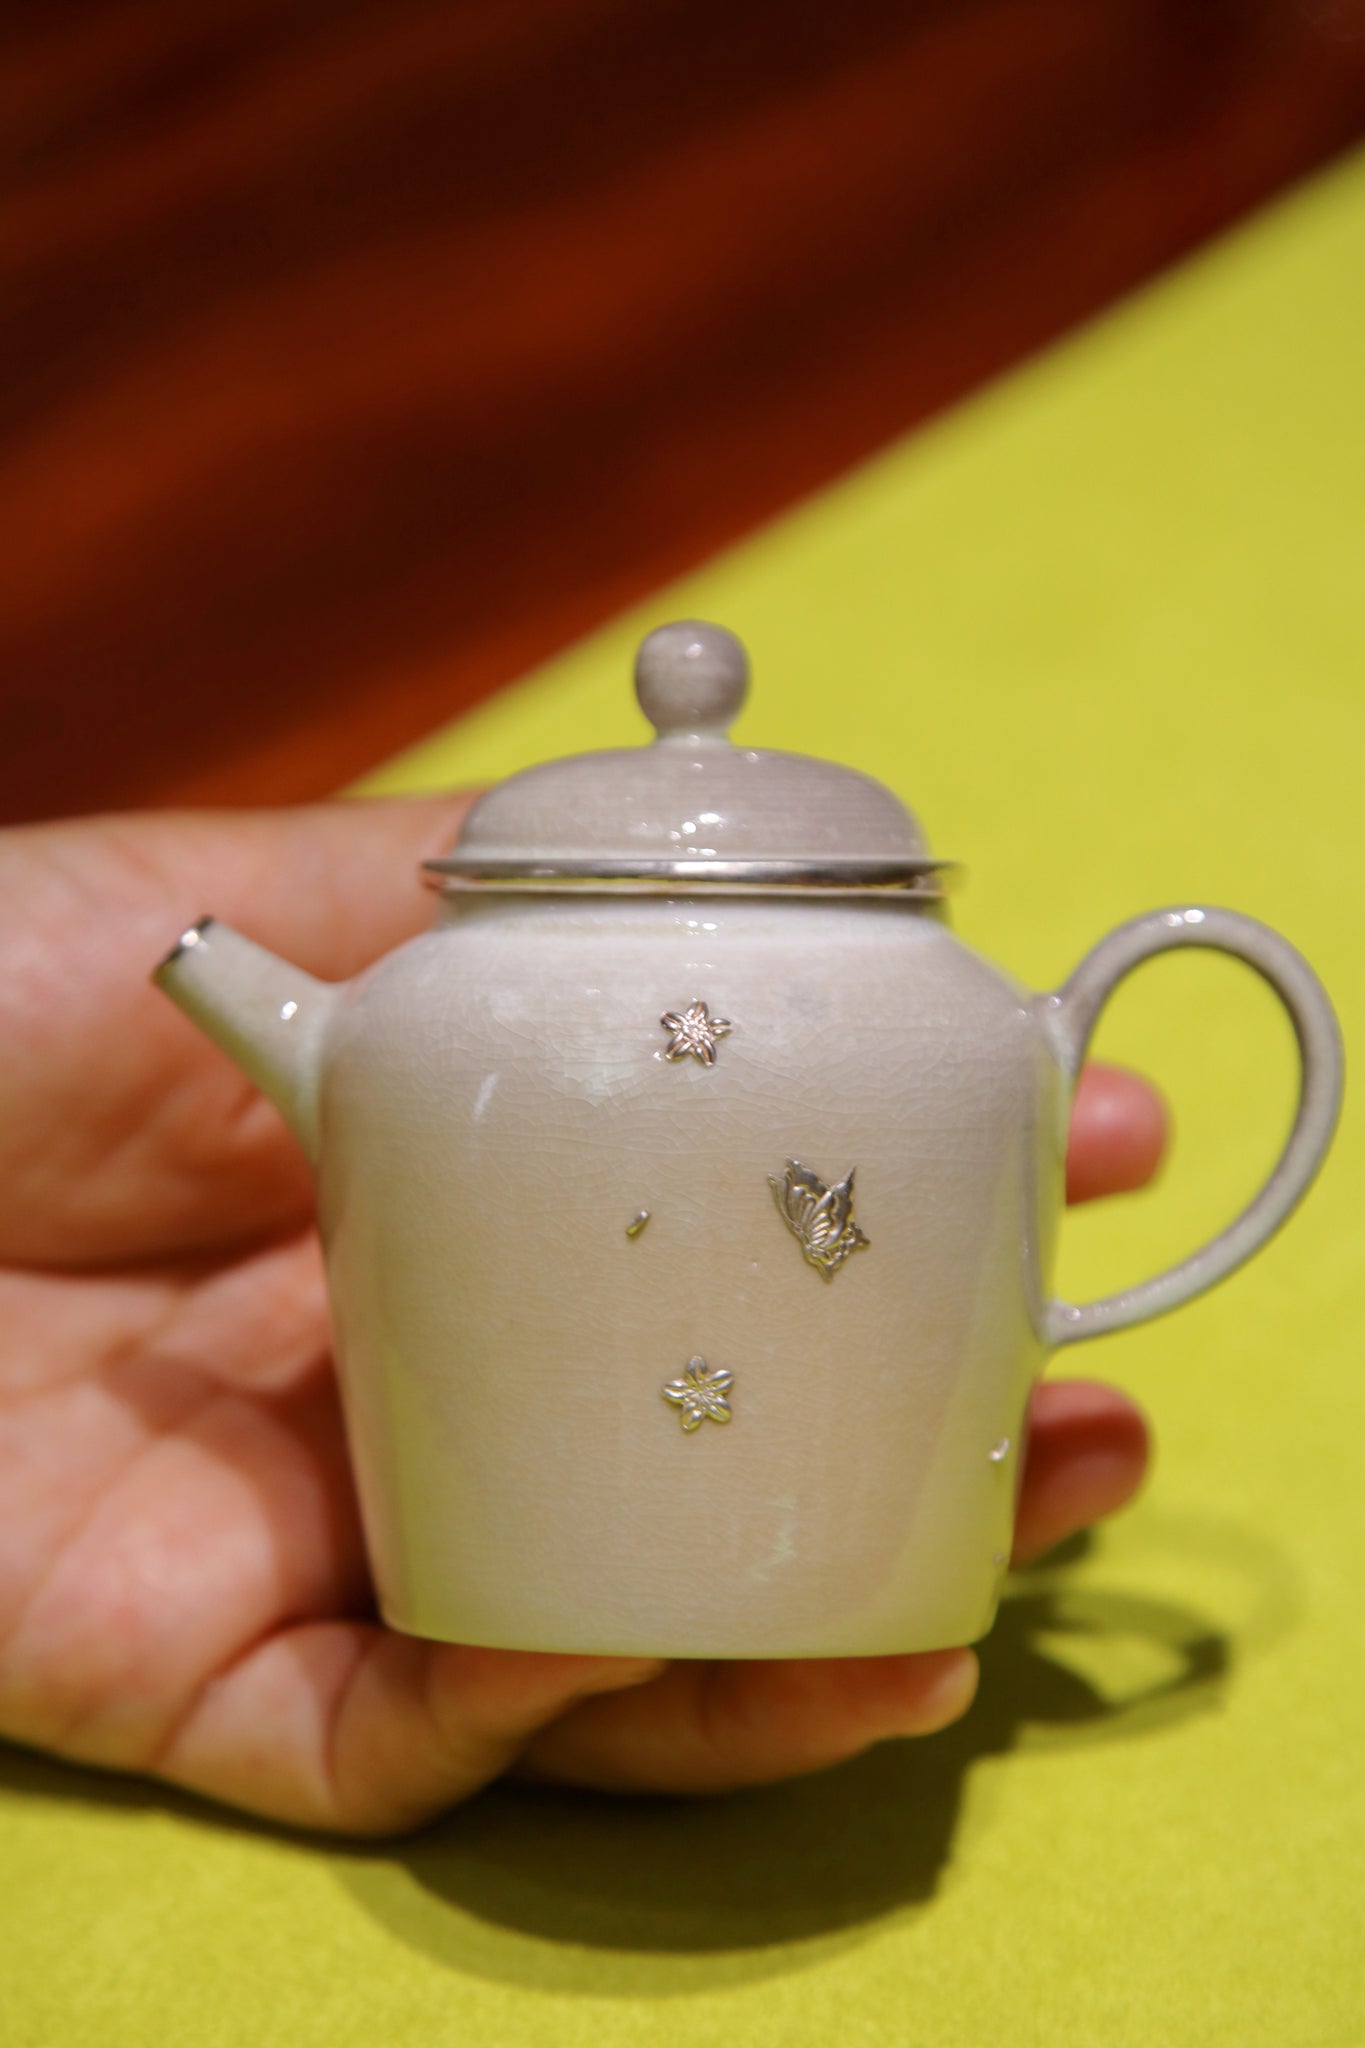 The ancient Chai Shao teapot is naturally dusty, covered with